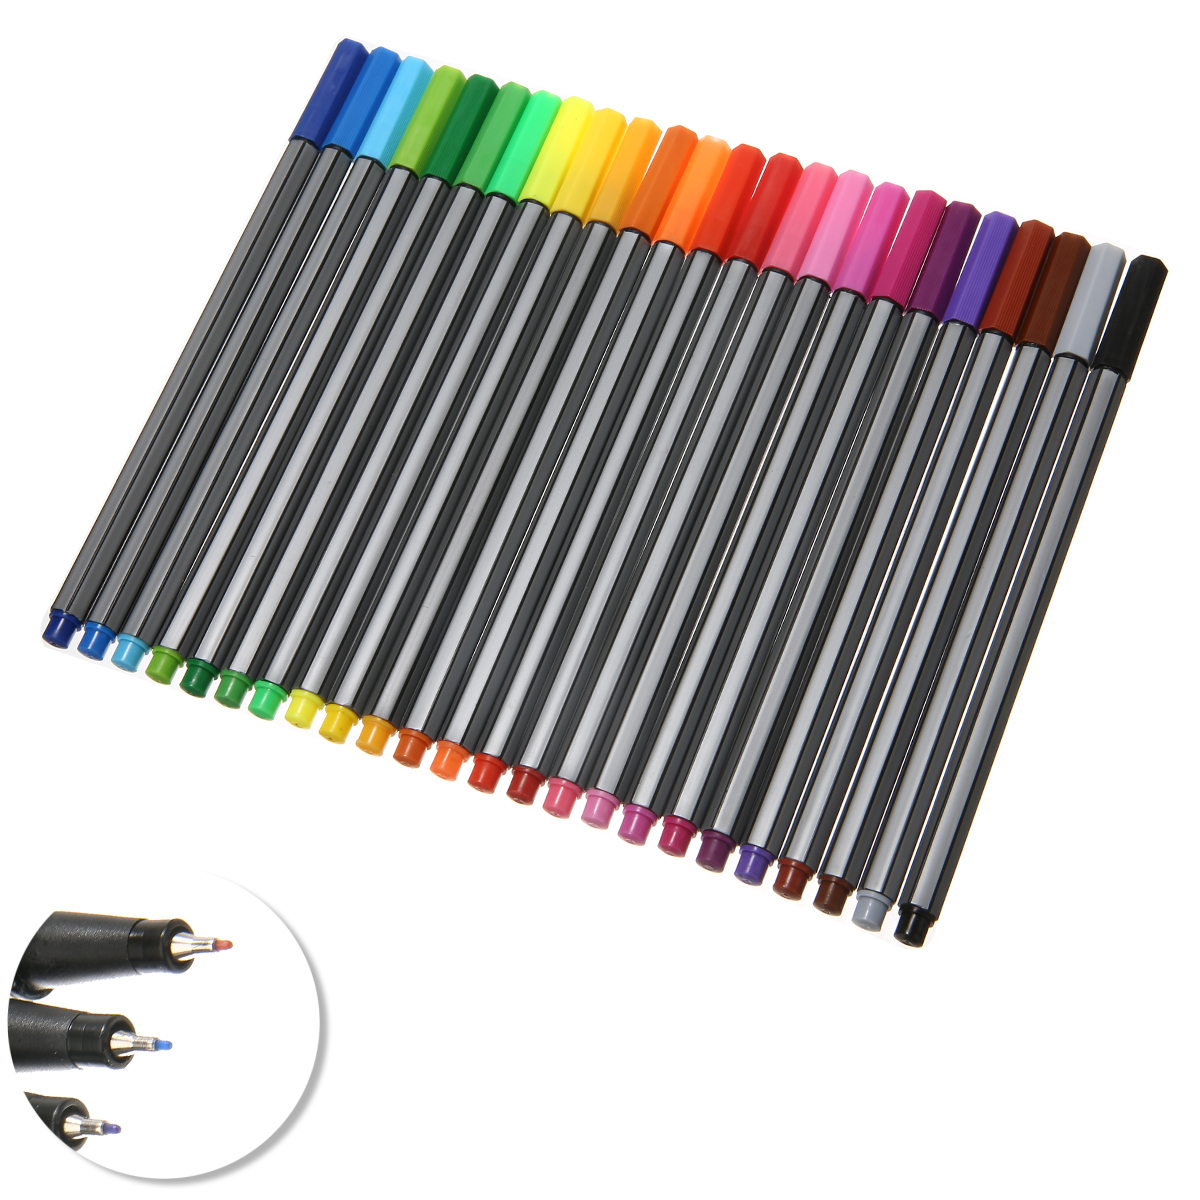 New 24 Colors 0.4mm Fineliner Pens Colored Sketch Fine Draw Marker Pen Set Water Based Assorted Ink Art Painting Markers Pen